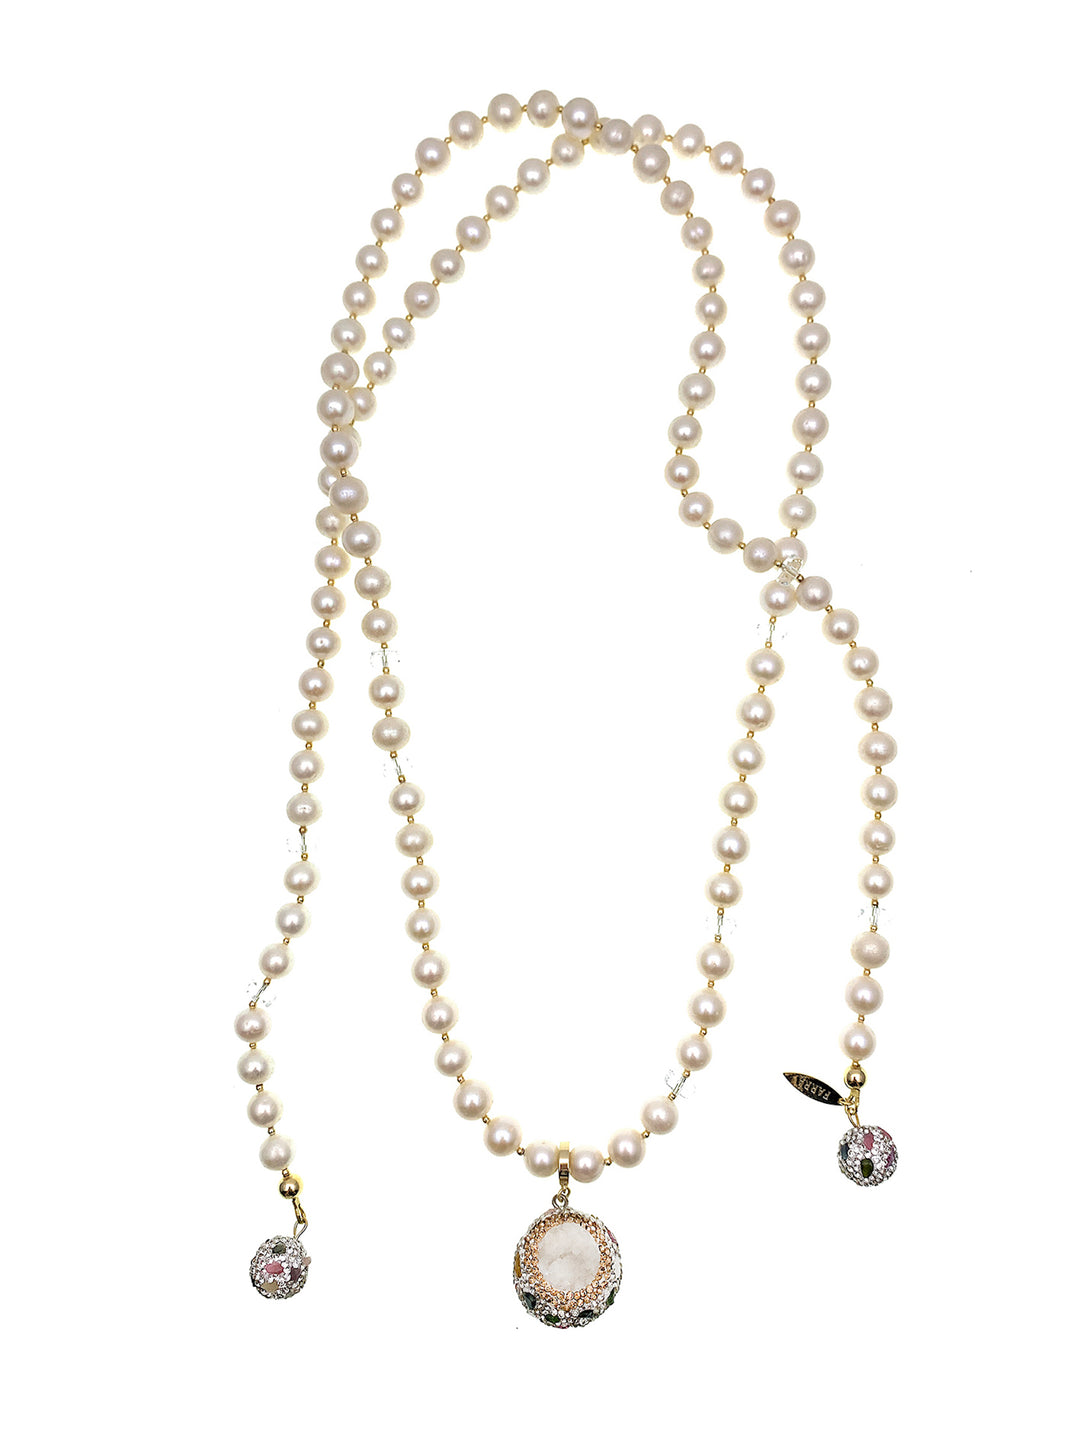 Freshwater Pearls With Tourmaline Rhinestones Open Ended Multi-way Necklace FN025 - FARRA